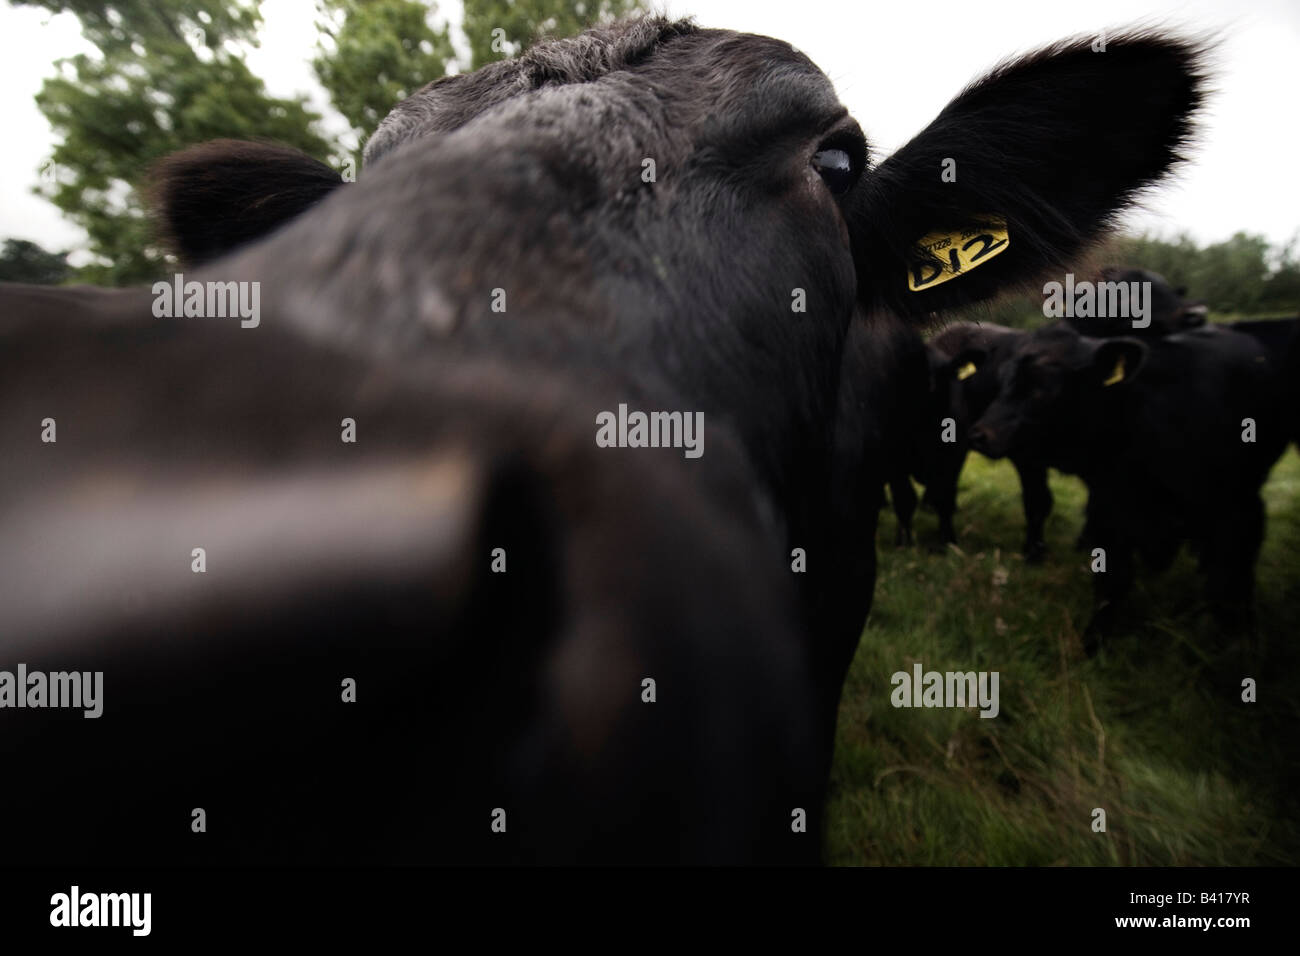 Cow noses up to camera Stock Photo